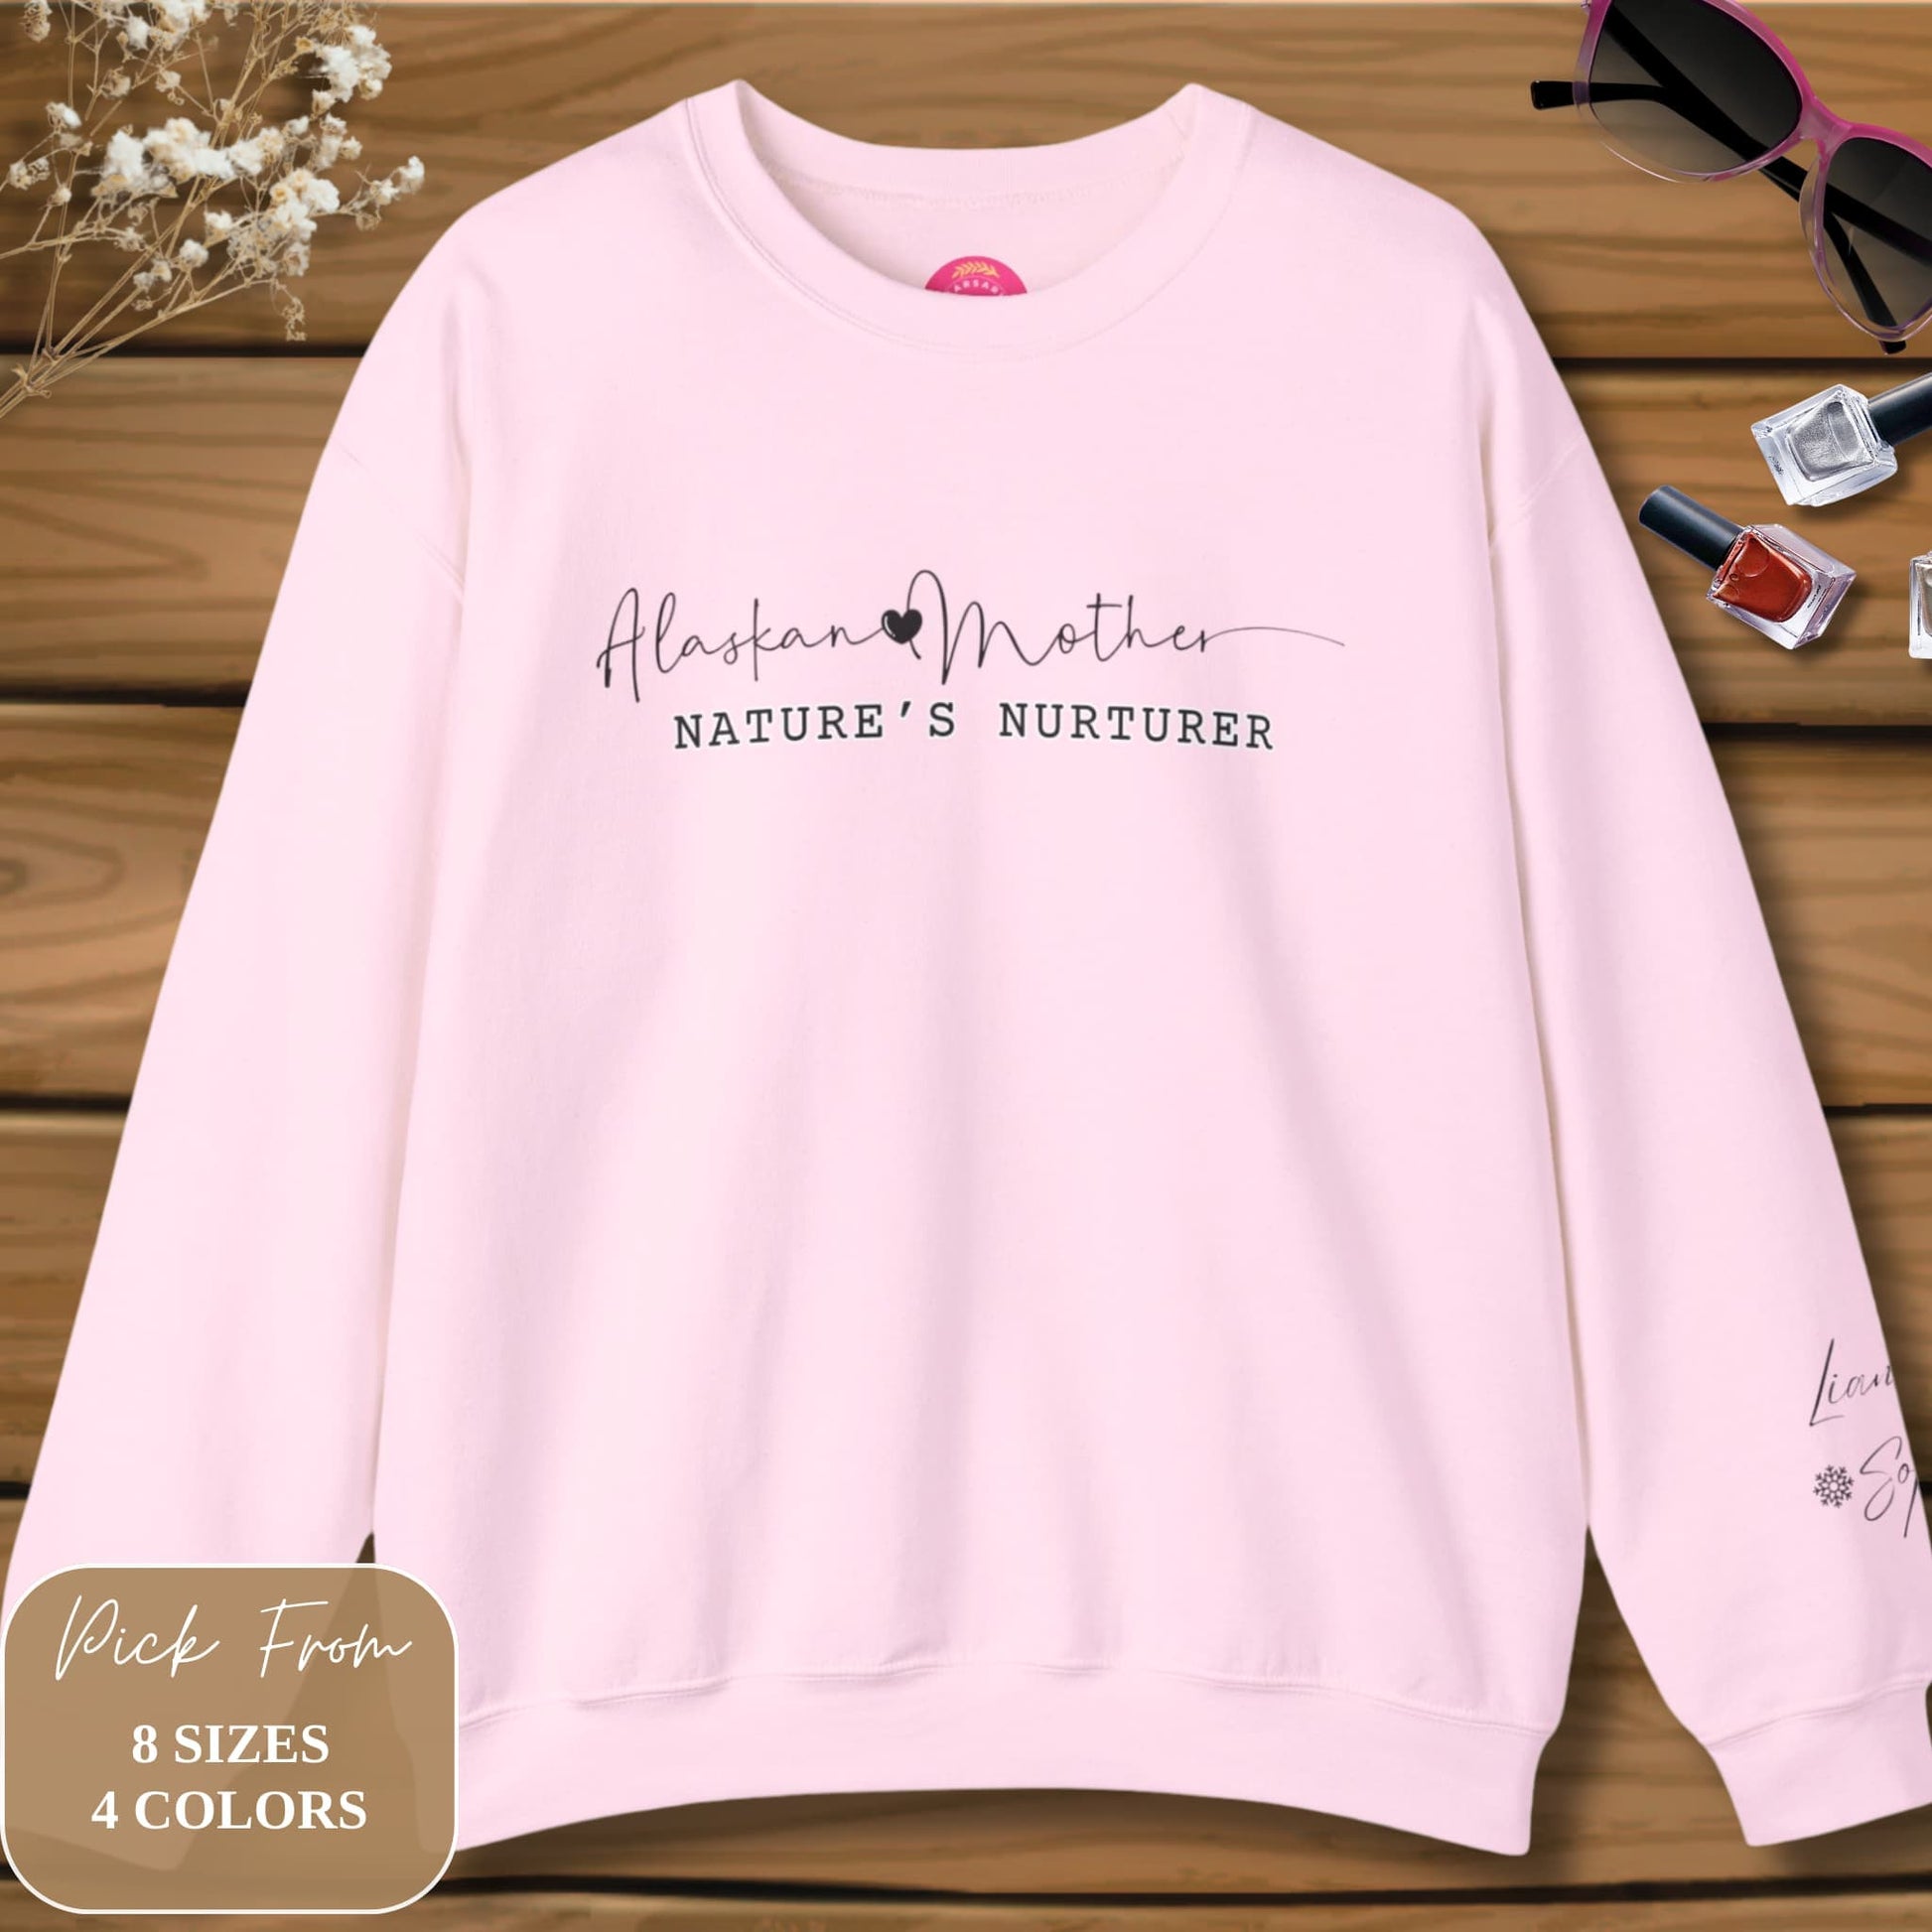 Alaskan Mother Personalized Crewneck Sweatshirt displayed on a wooden surface, adorned with flowers and women's accessories in an elegant flatlay.